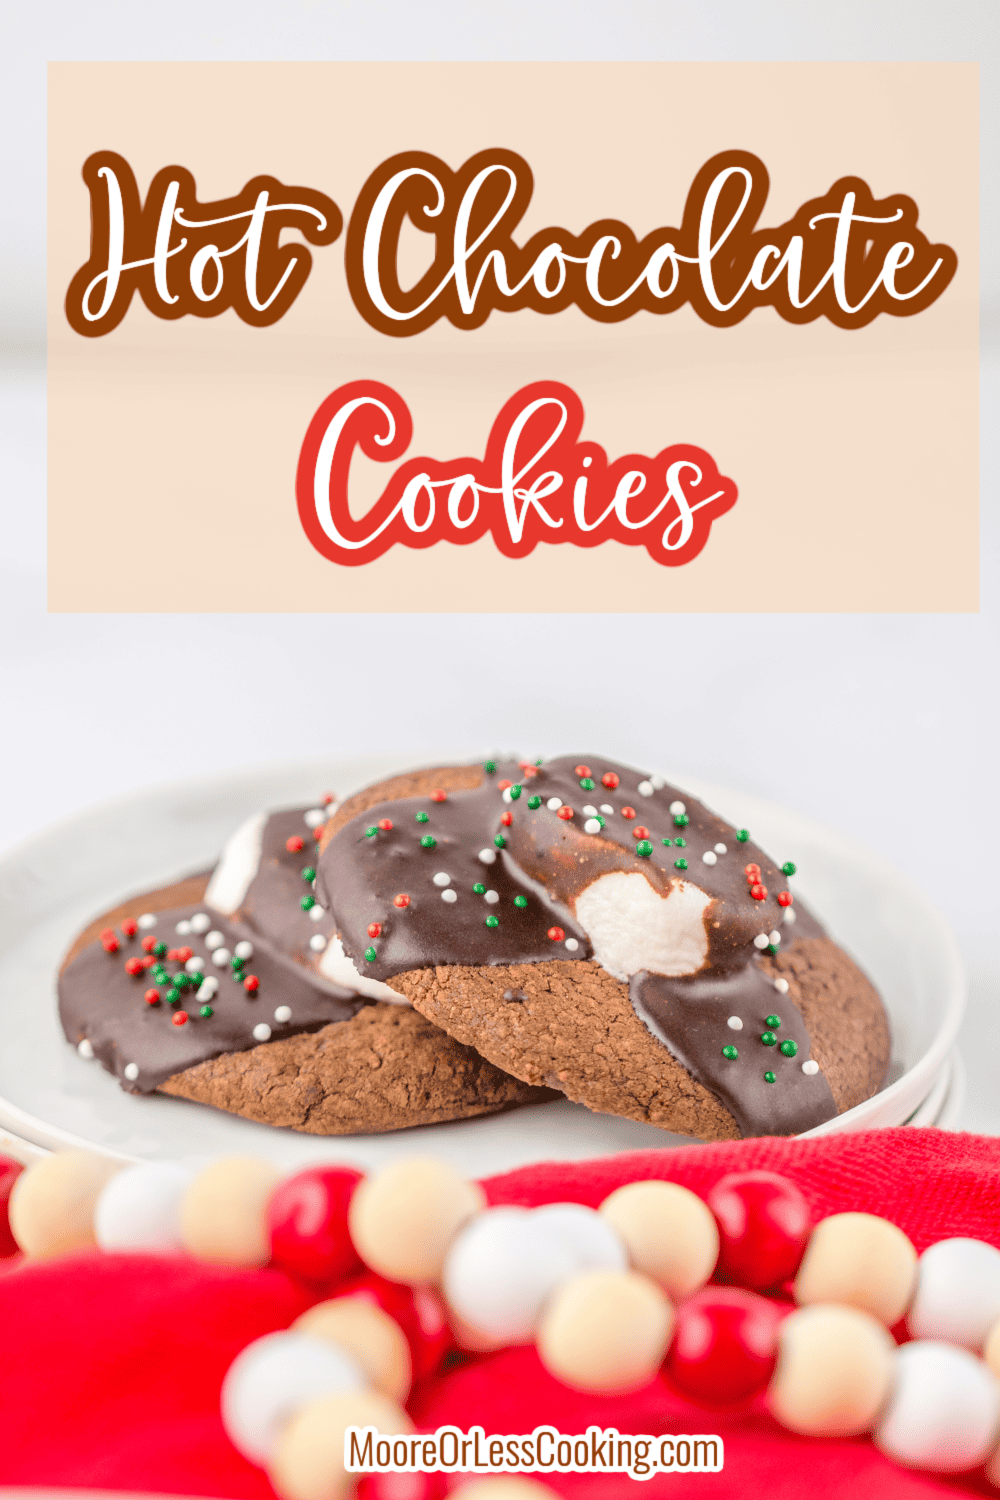 Perfect for winter holidays, these Hot Chocolate Cookies are a delicious sweet treat for chilly days, parties, or cookie exchanges. The chocolate cookies are topped with gooey marshmallows and drizzled with creamy chocolate icing for a scrumptious finish that tastes just like hot cocoa! via @Mooreorlesscook